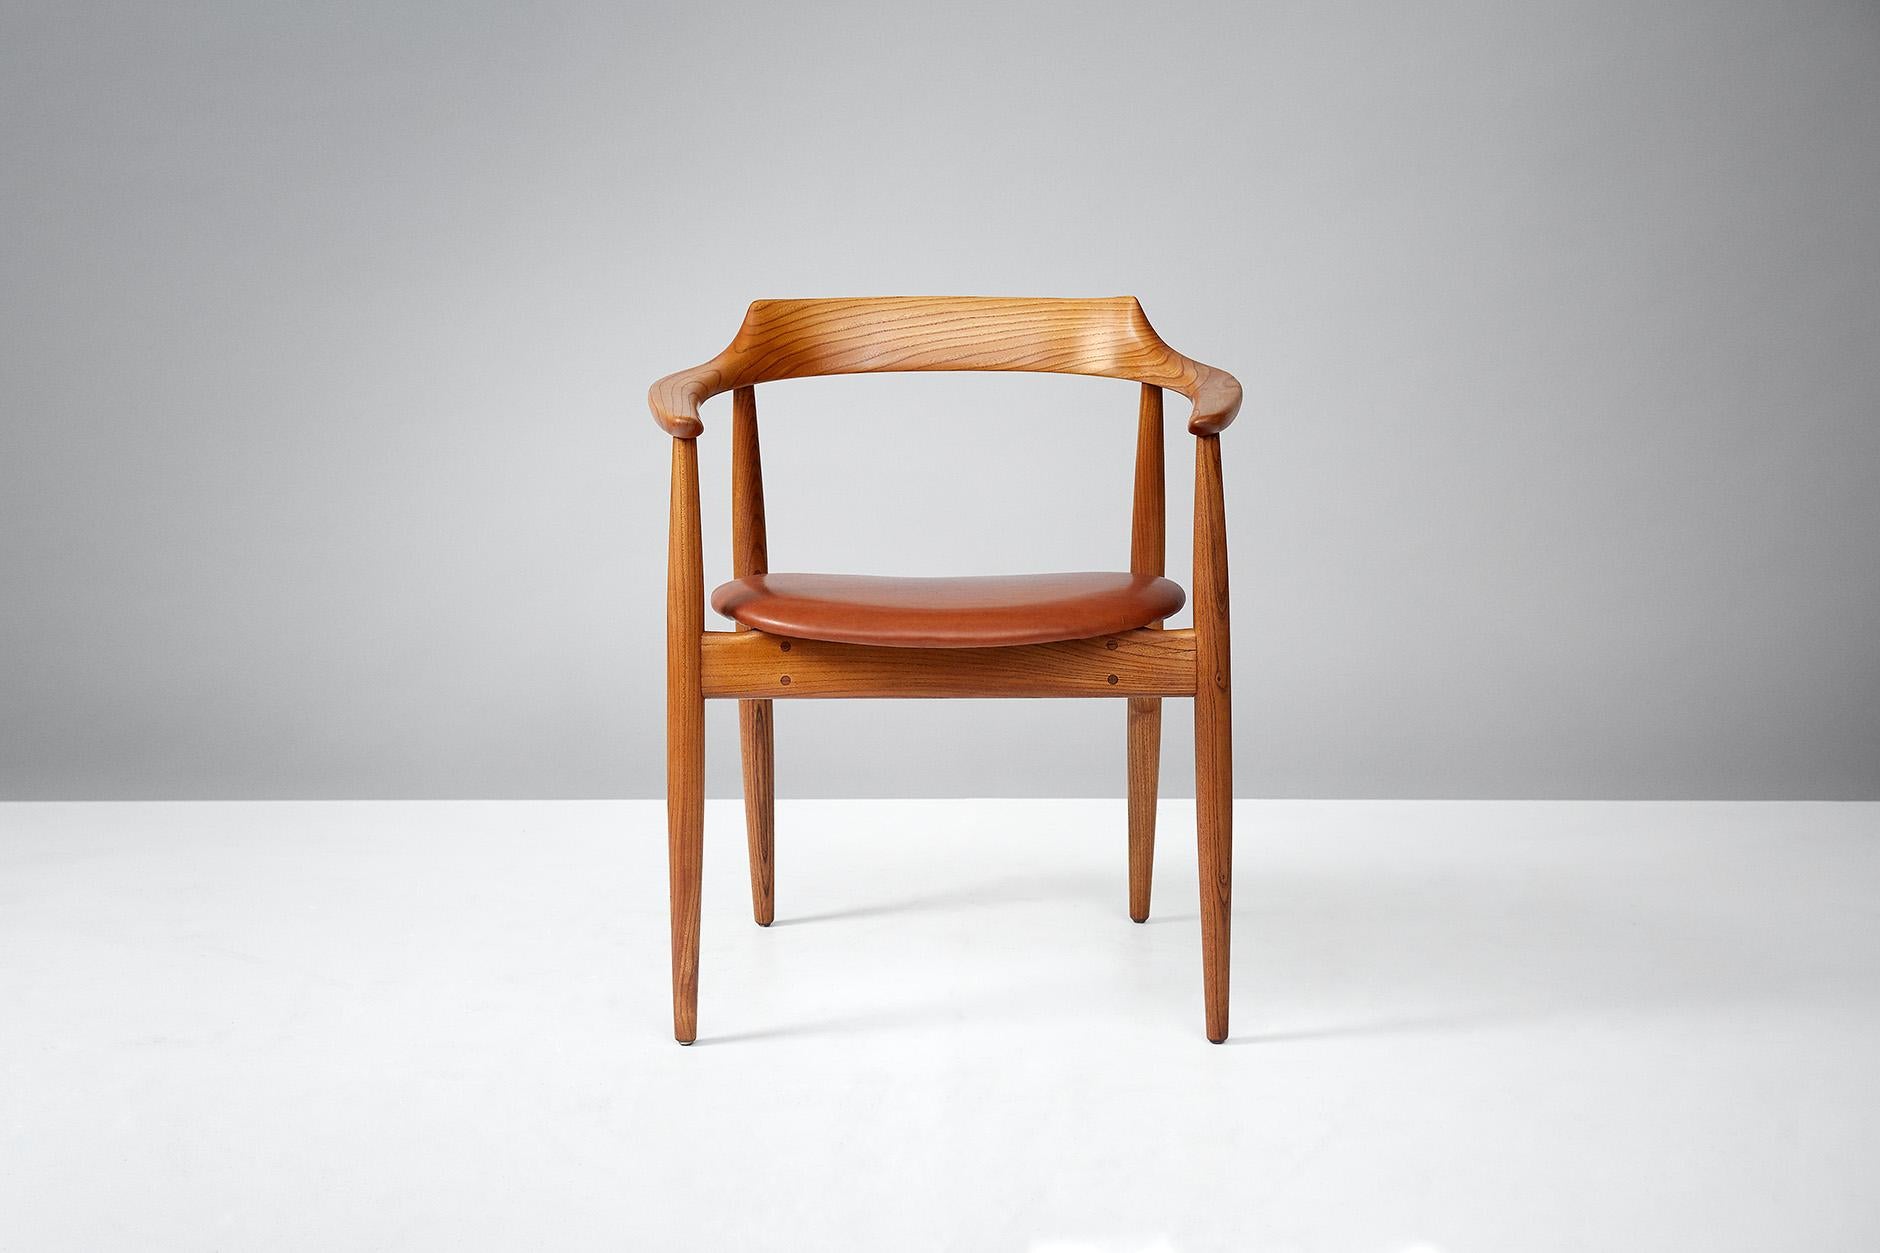 Arne Wahl Iversen

Model ST-750 round chair, circa 1960

Architectural round chair made from solid oiled elm wood. Seat reupholstered in premium aniline cognac leather. 

Literature: Svend Wohlert Inc. catalogue, circa 1960, p. 4.